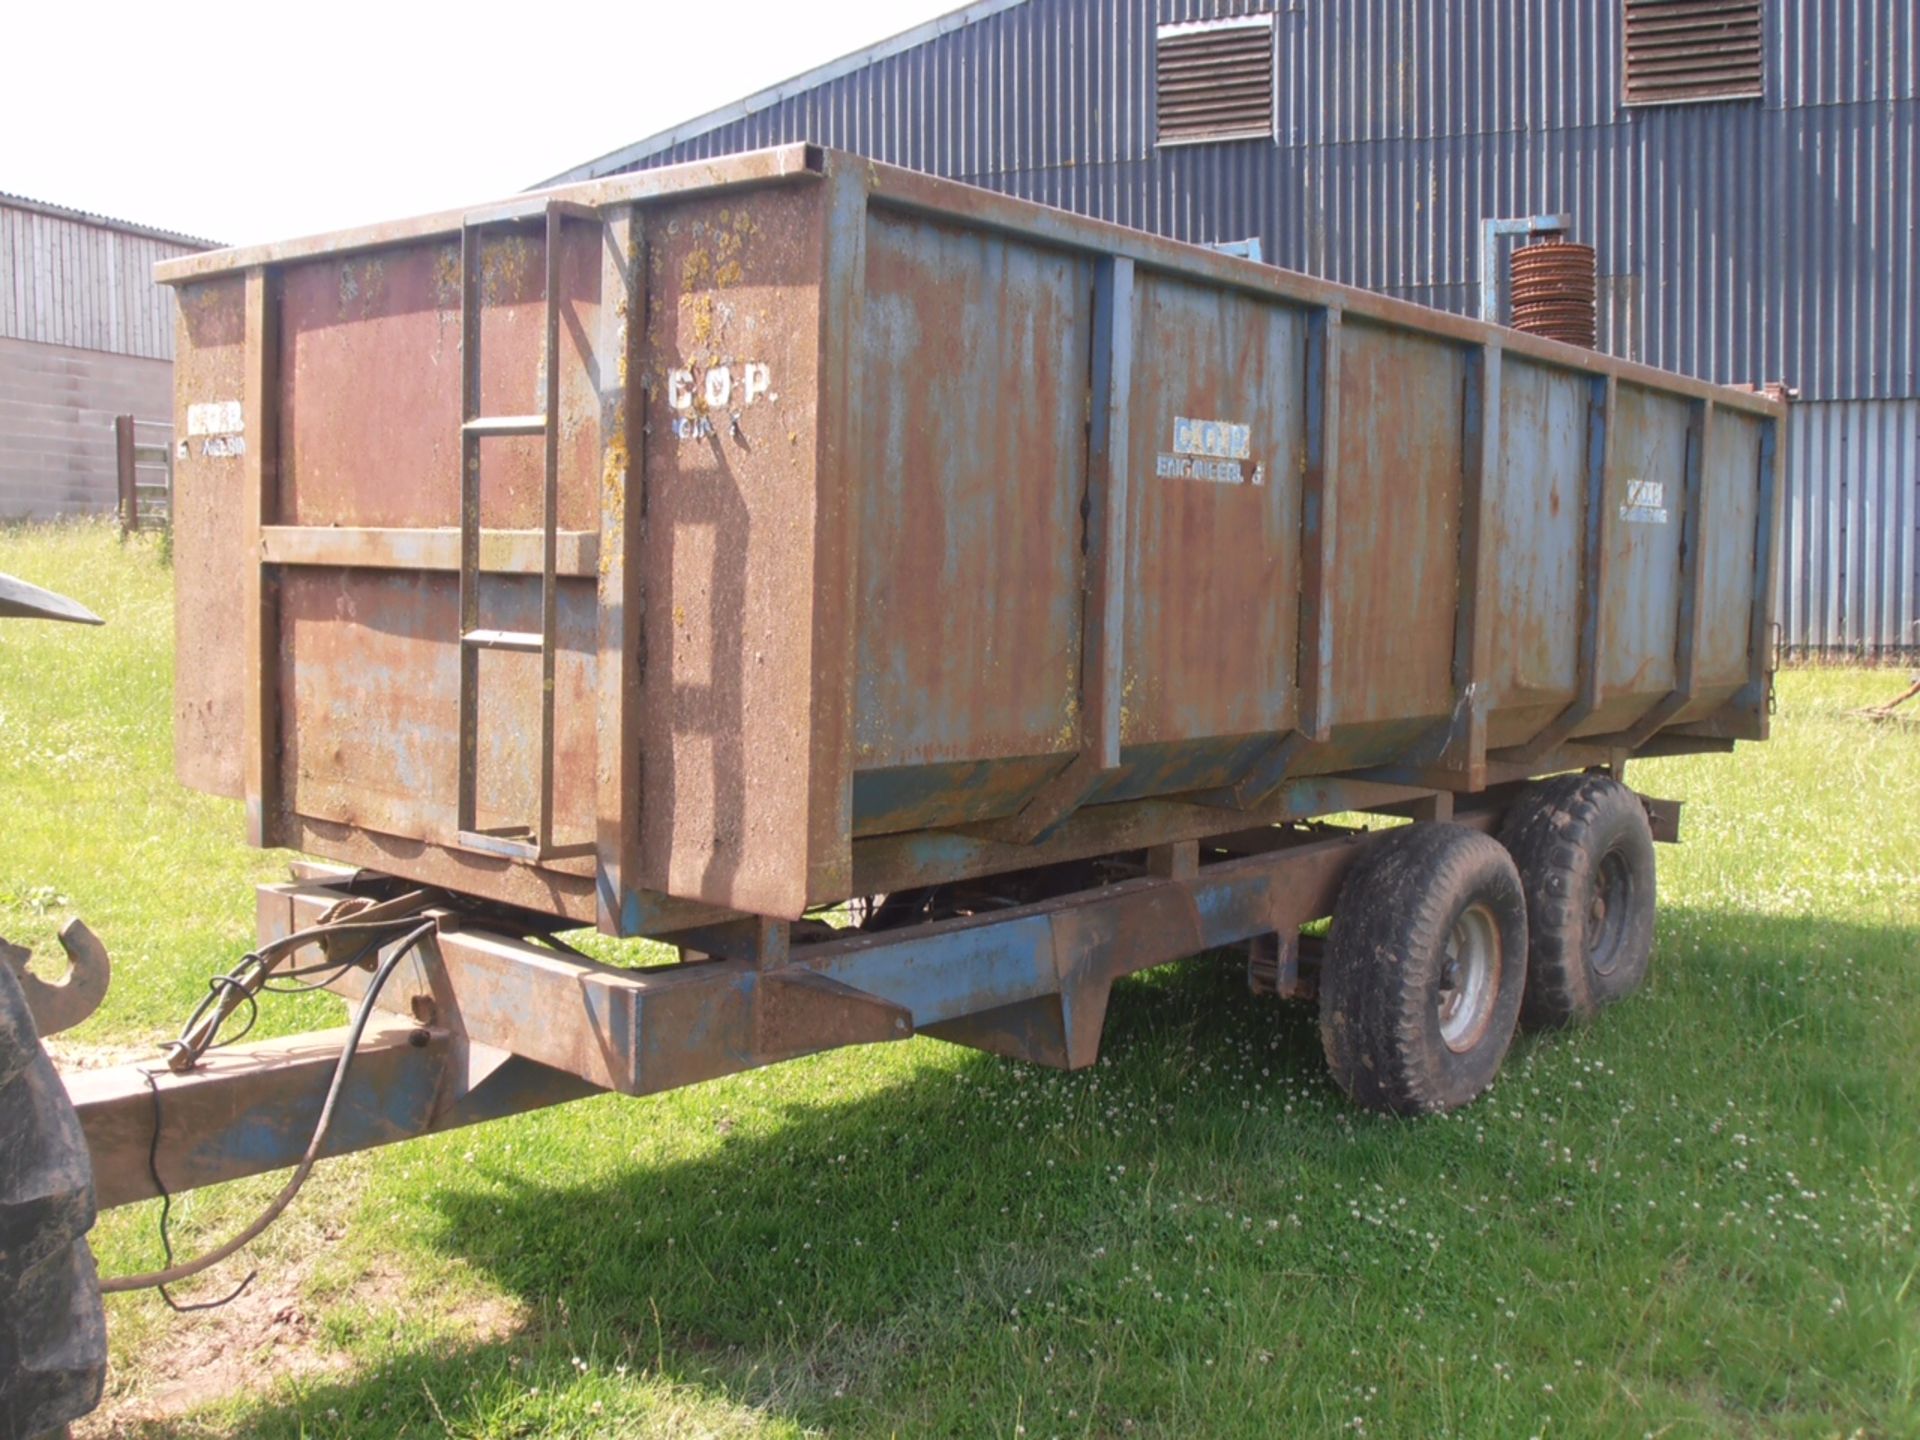 9 Tonne Tipping Trailer Location: Monmouth, Monmouthshire - Image 3 of 3